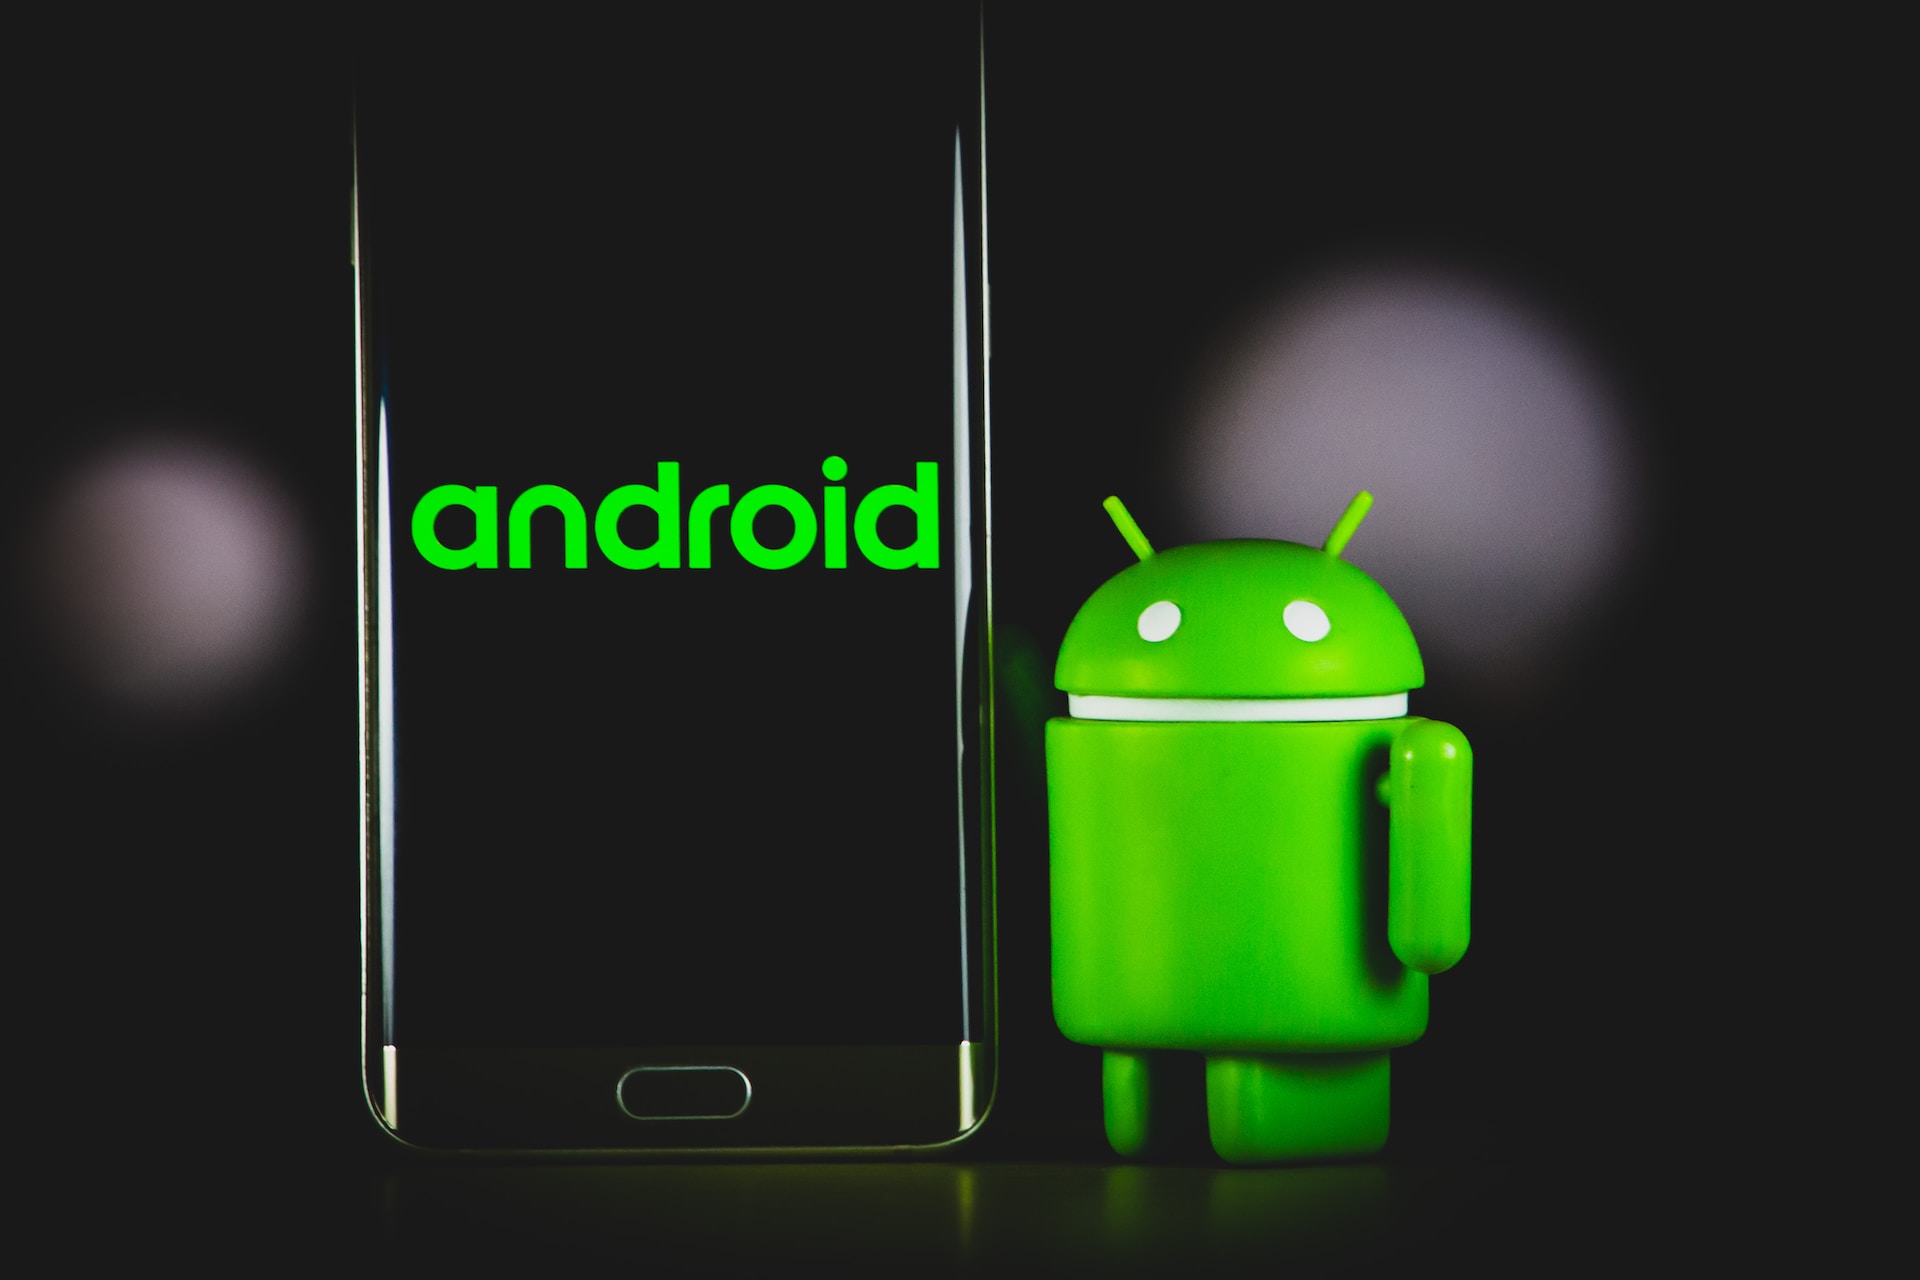 “Guerilla” Malware Found Preinstalled on Android Devices